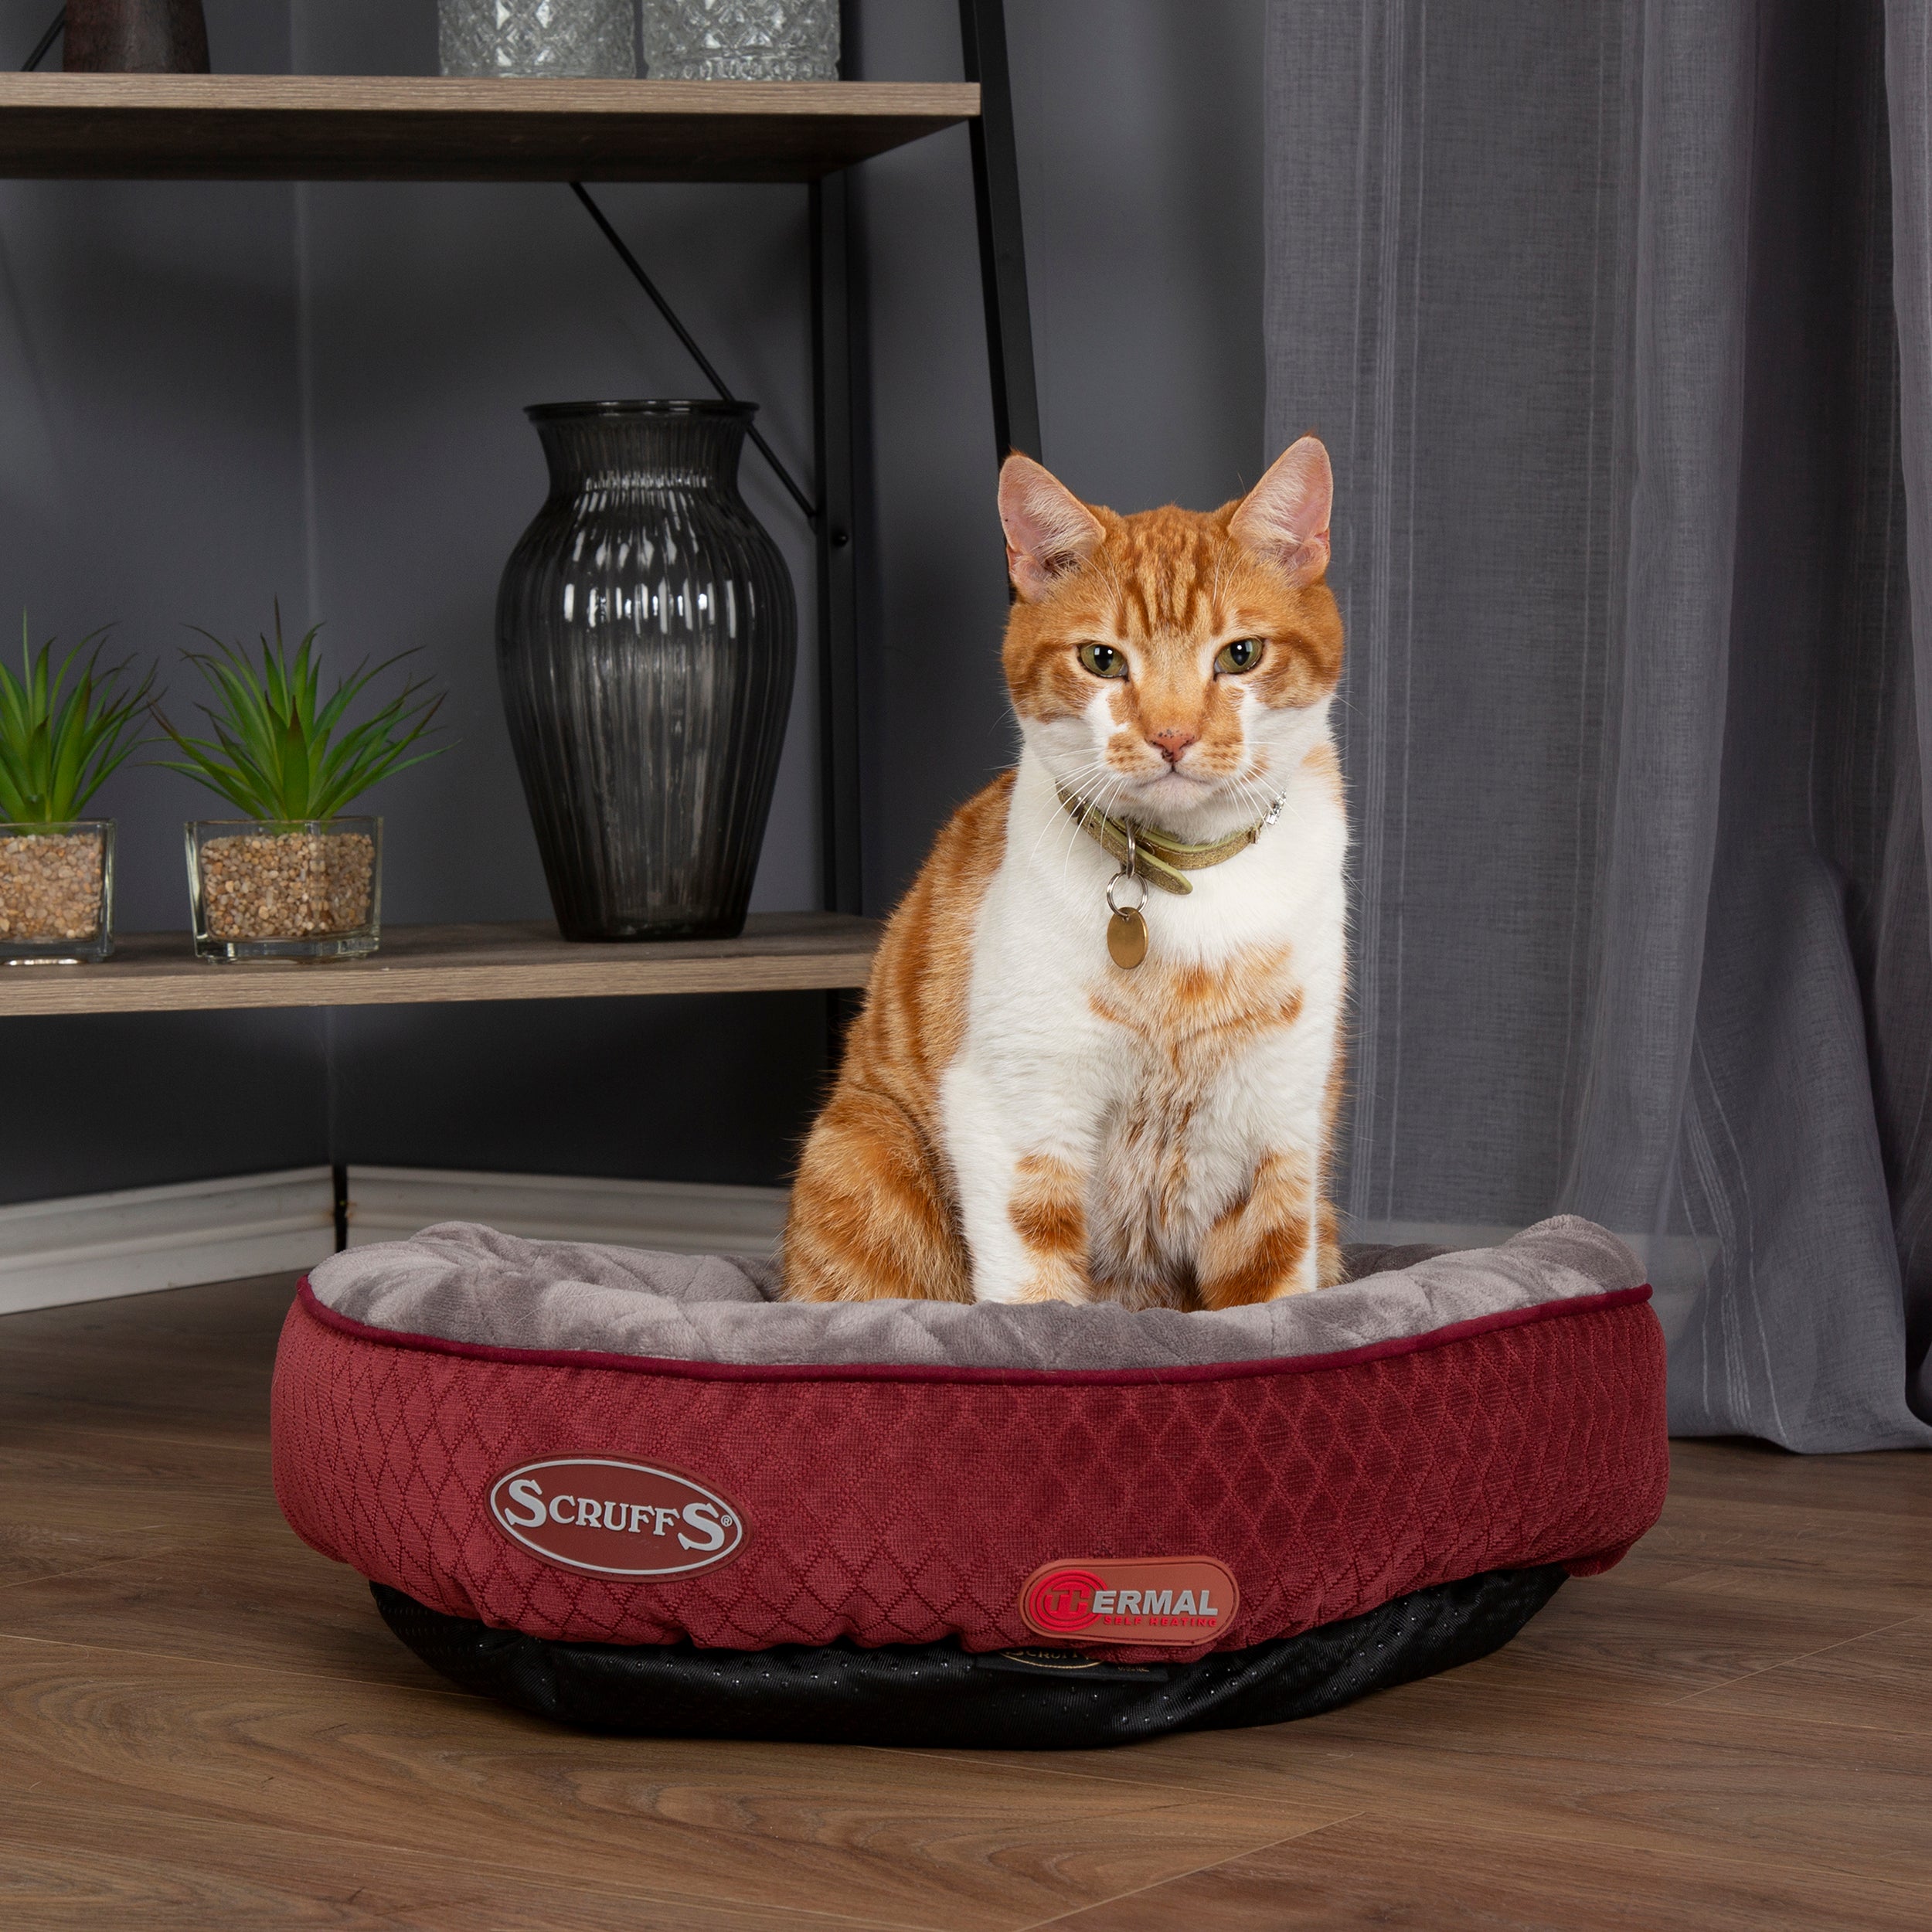 Scruffs Pet Thermal Ring Bed Red/Brown